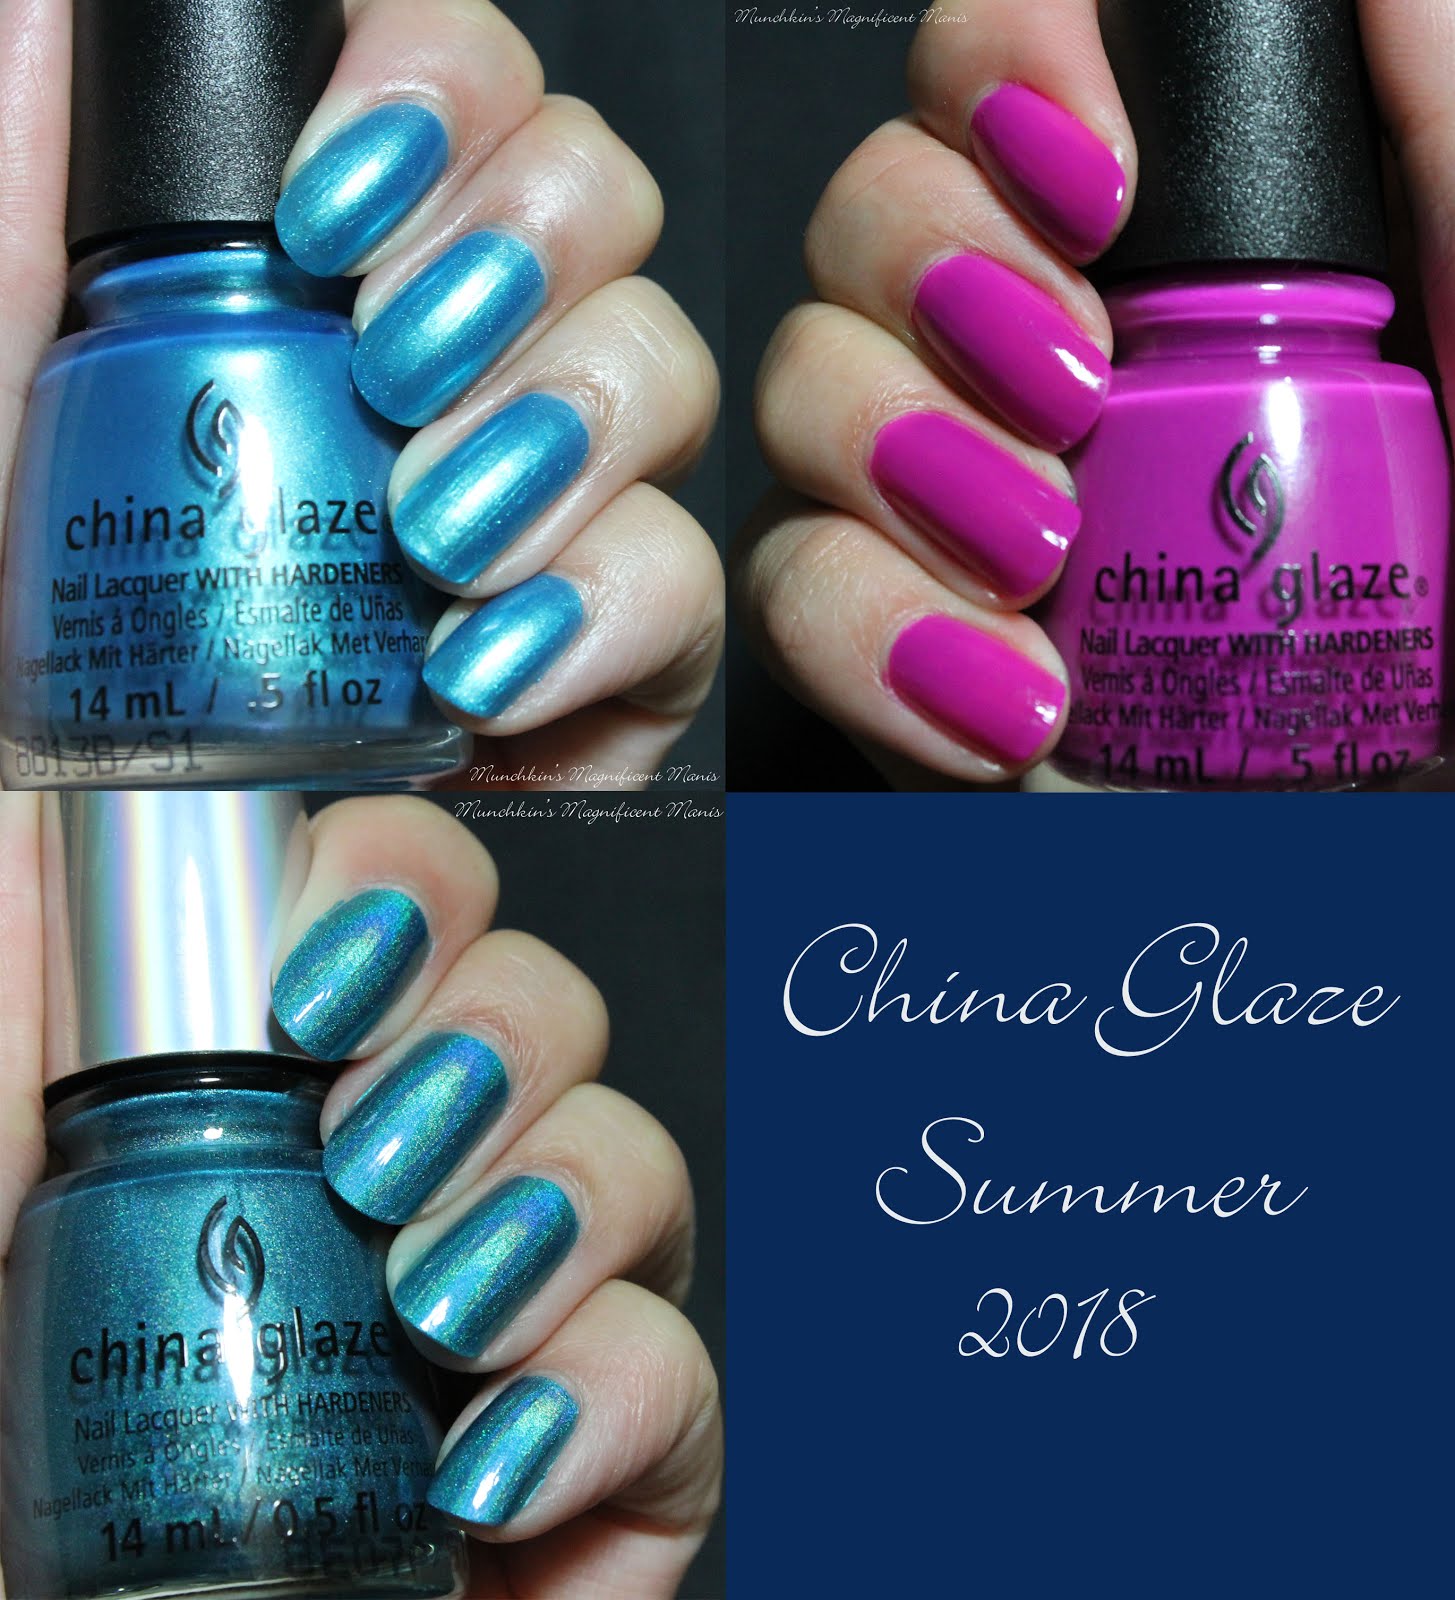 Munchkin’s Magnificent Manis China Glaze Summer 2018 Review